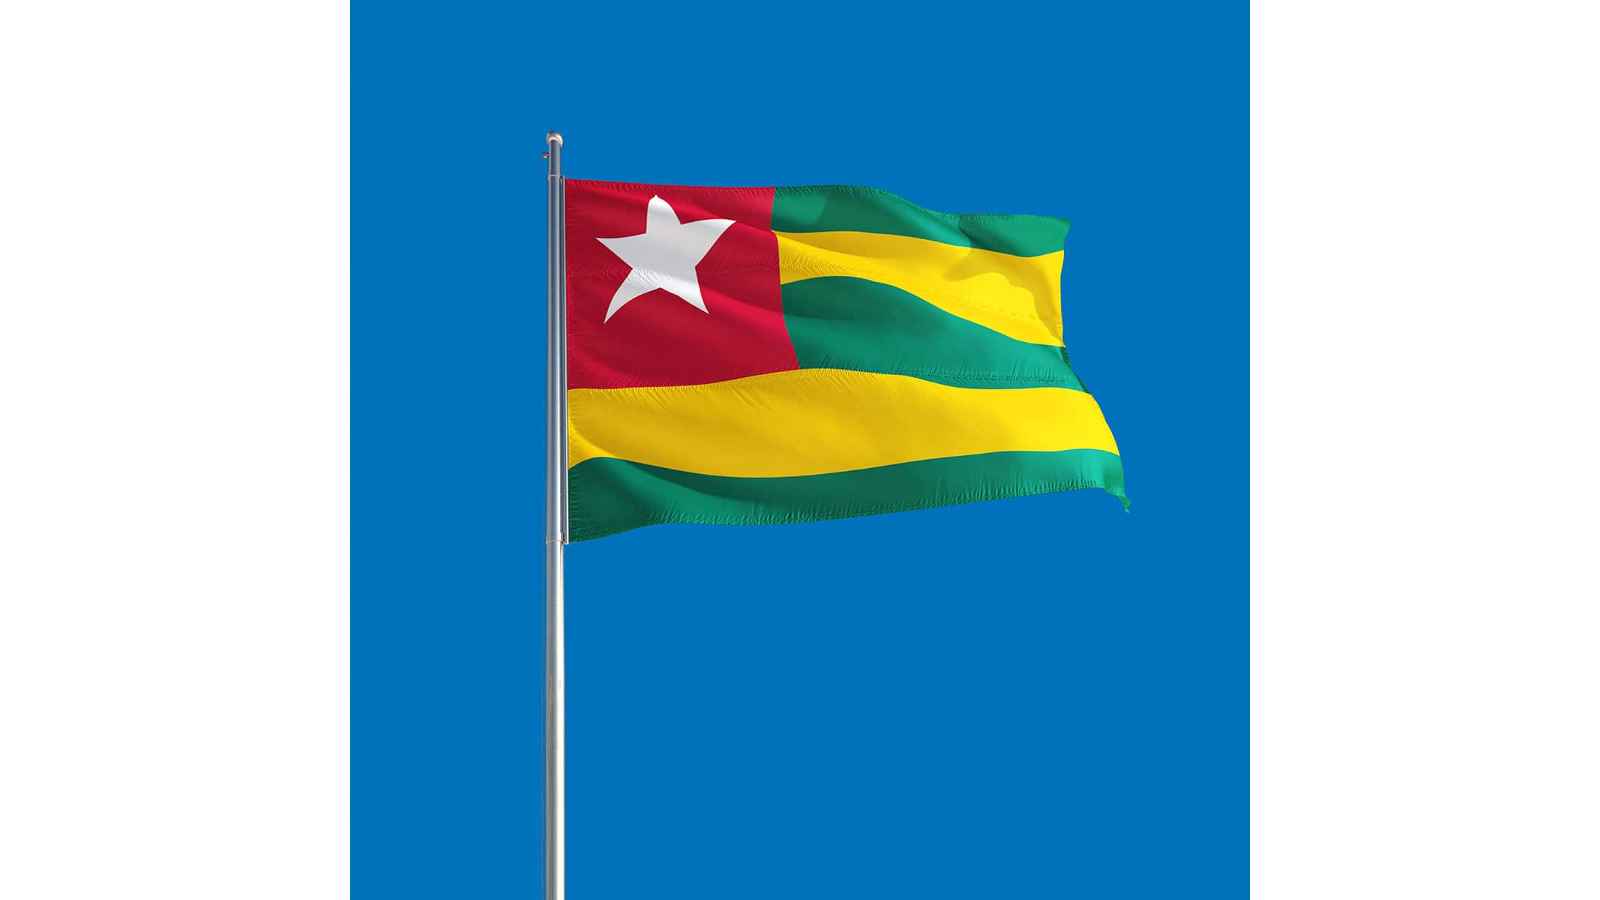 Martyrs' Day in Togo 2023: Date, History, Facts about Togo